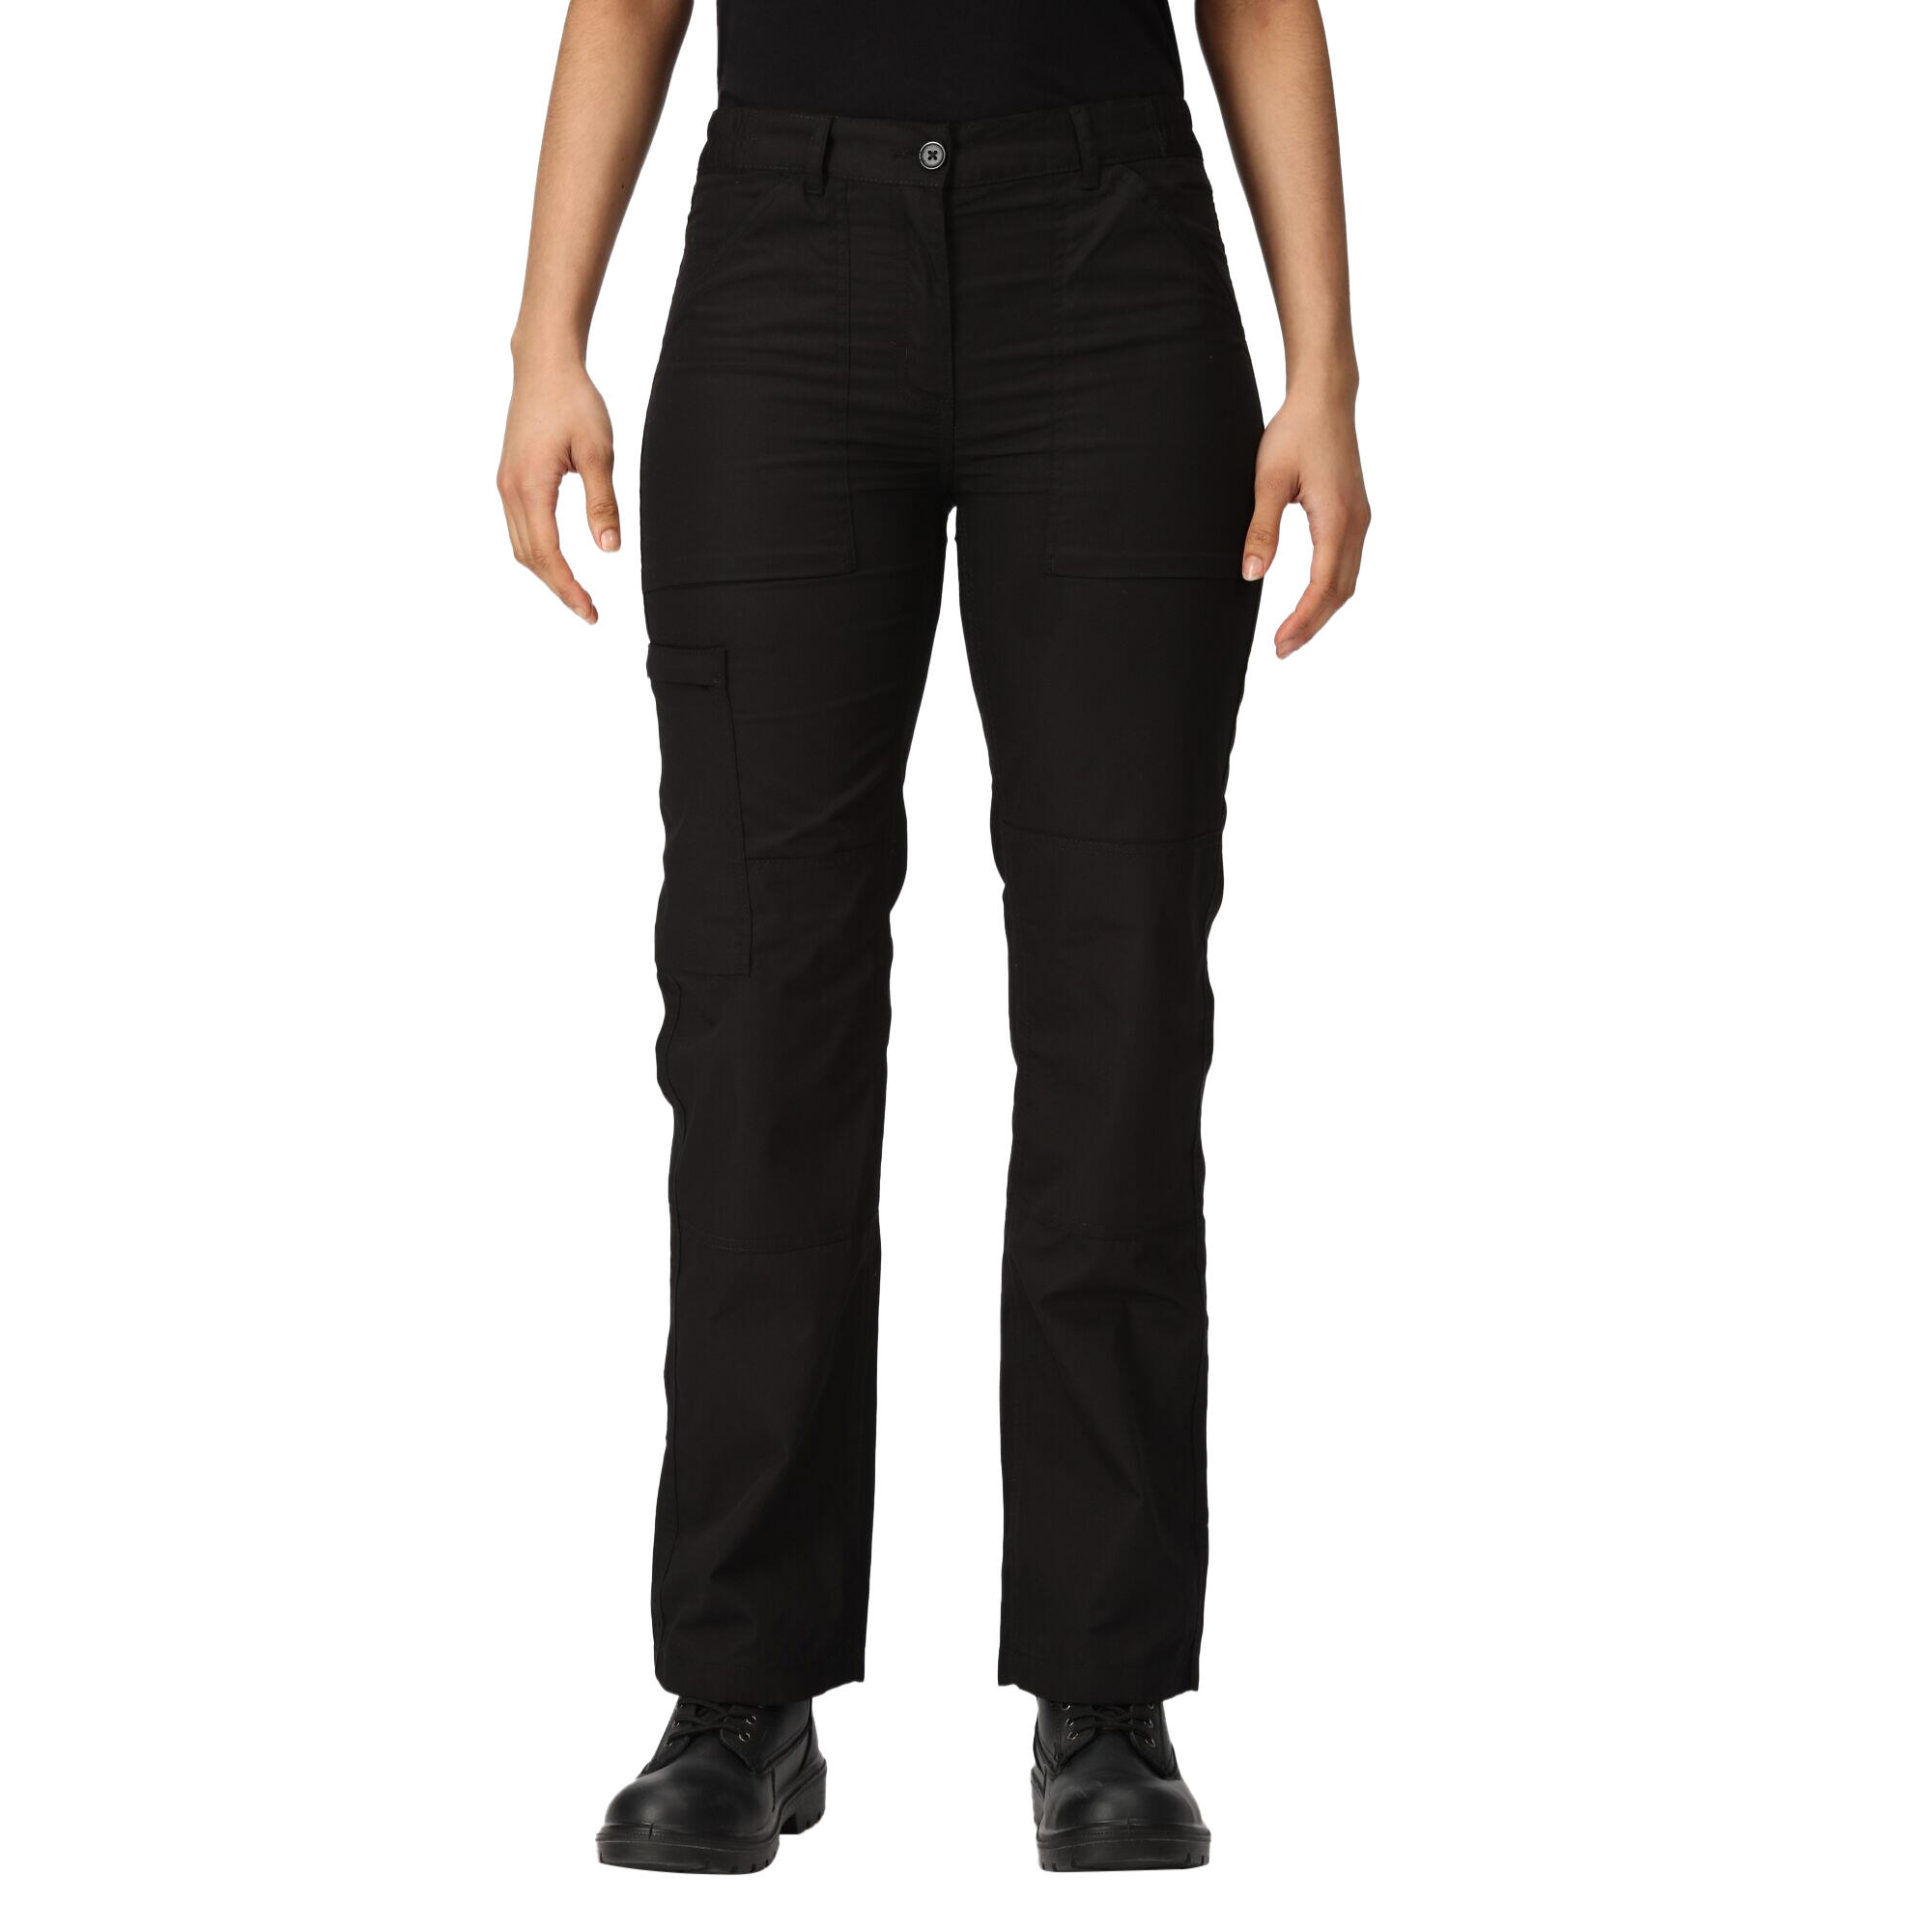 New Womens/Ladies Action Sports Trousers (Black) 3/4